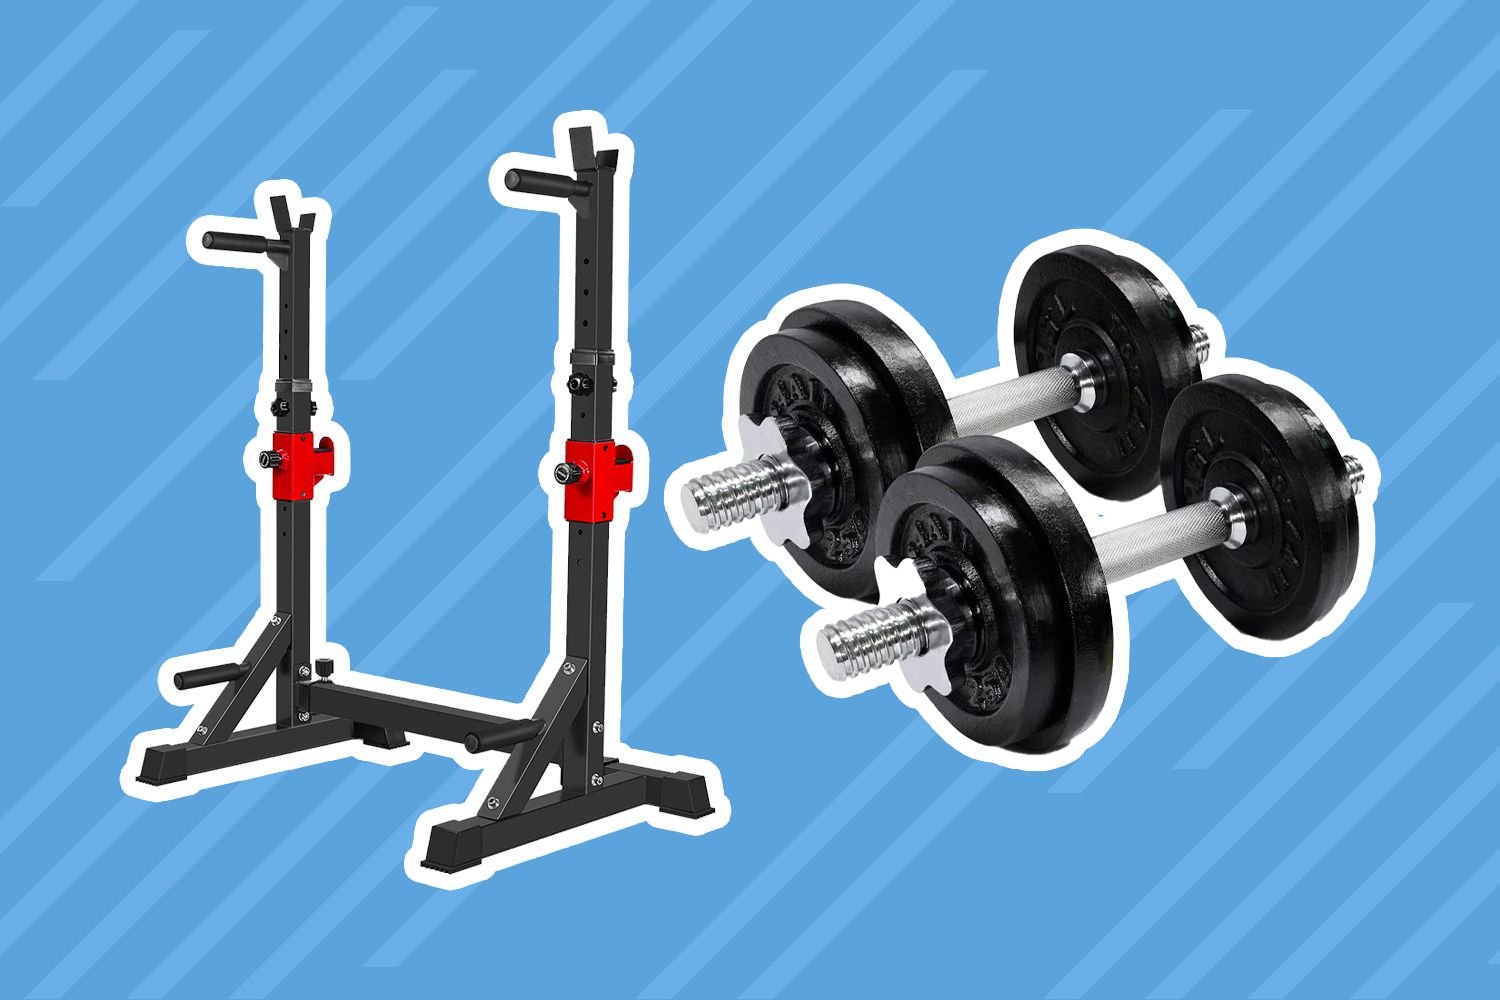 Affordable Options for Home Gym Machines